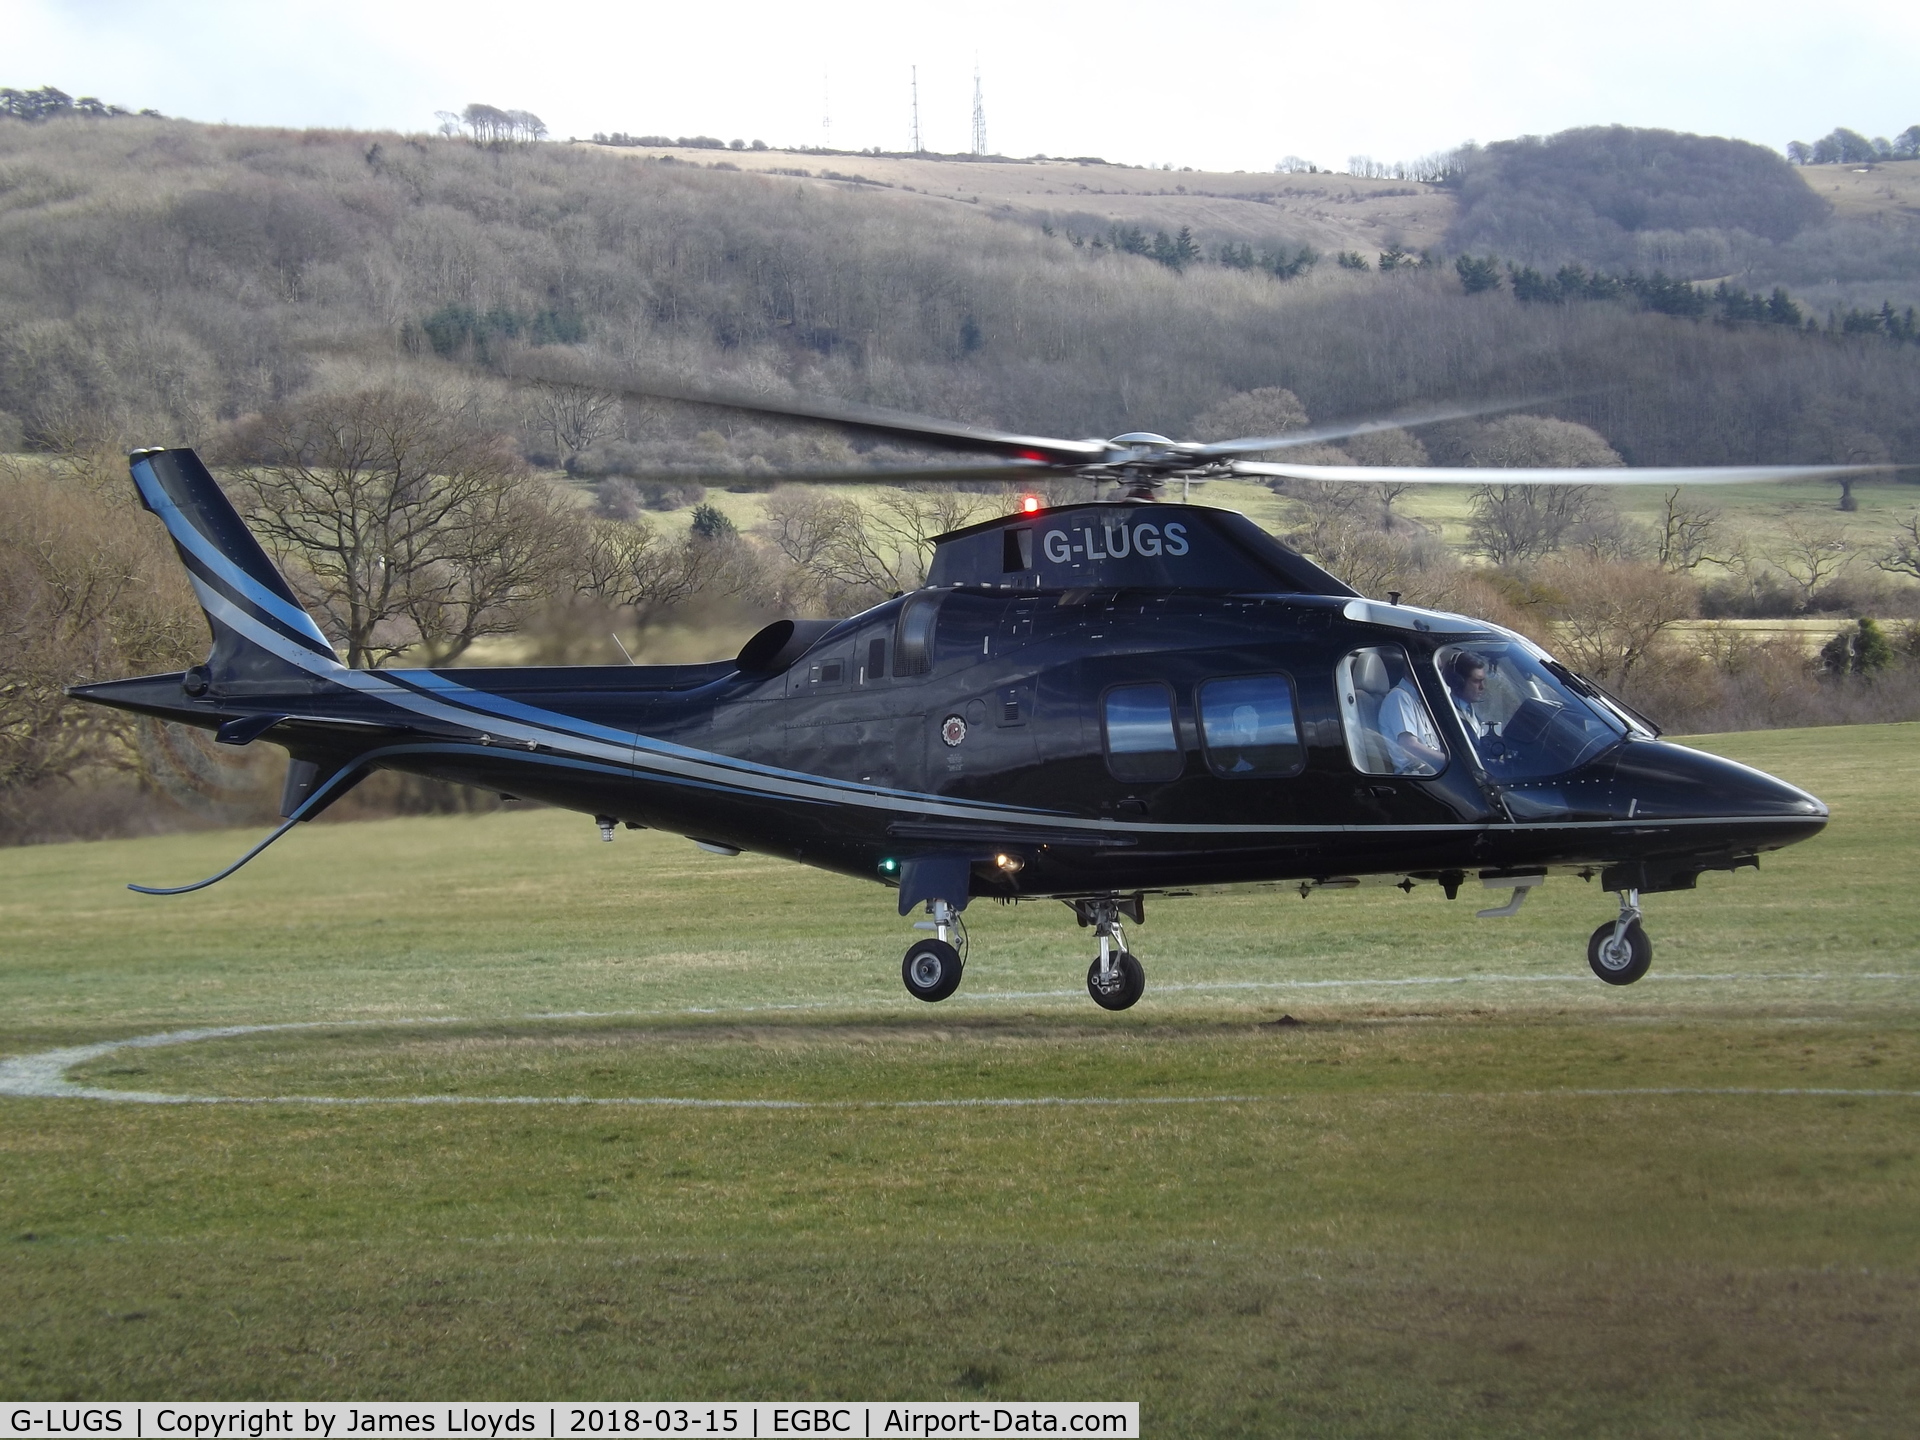 G-LUGS, 2009 Agusta A-109S Grand C/N 22125, Arriving at Cheltenham Helipad with pax for the Cheltenham Gold Cup.